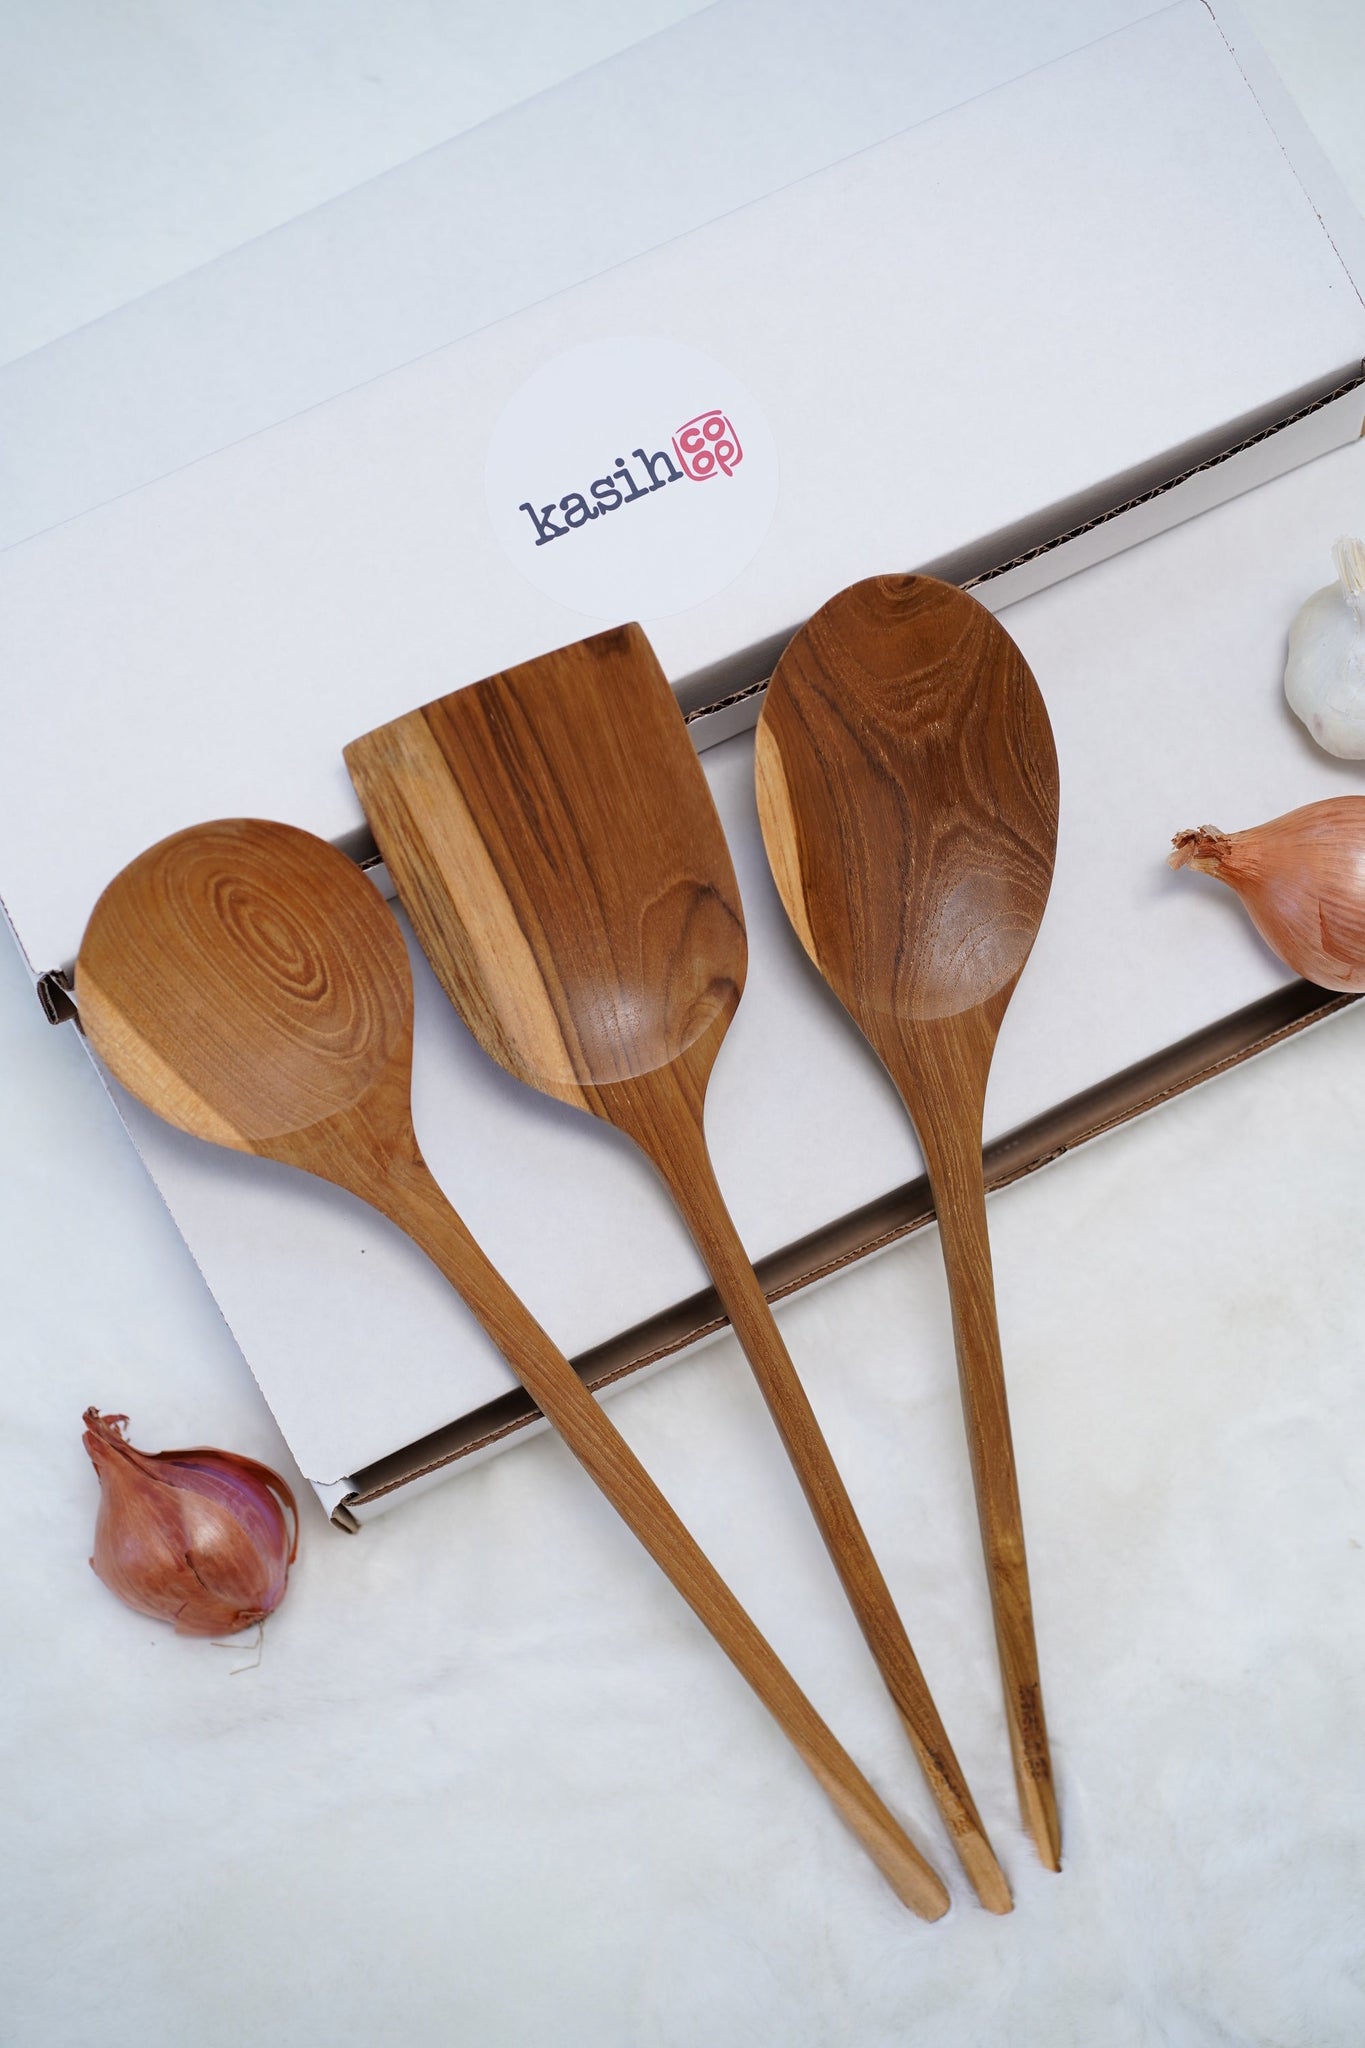 Teak Wood Cooking Utensil Set – The Chef's Cabinet